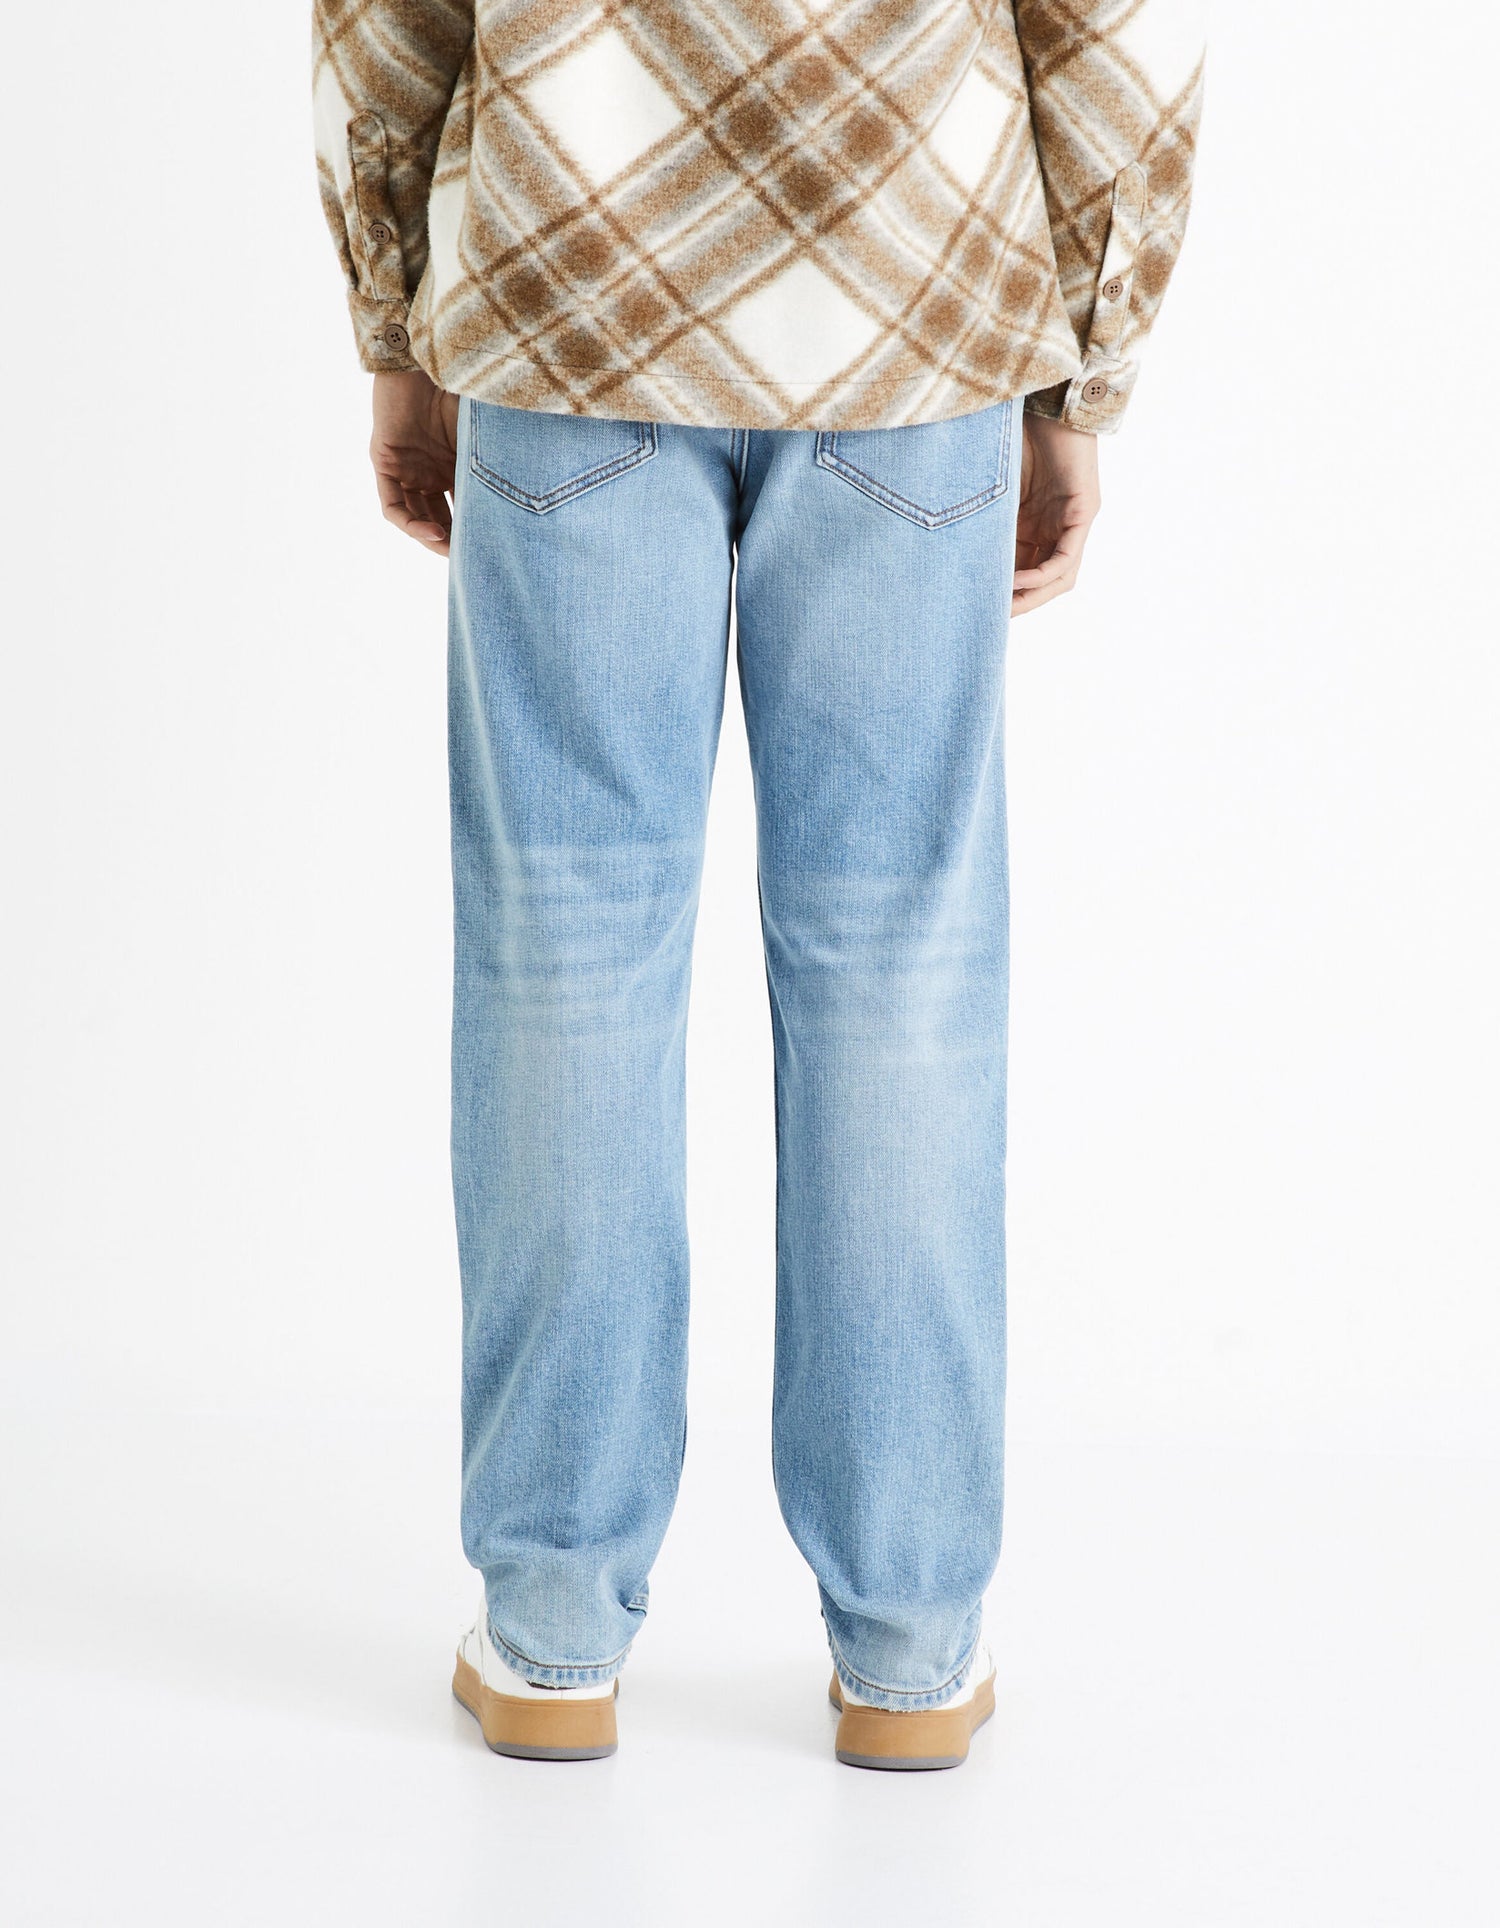 C15 3-Length Straight Jeans - Bleached_DOSTRA15_BLEACHED_04